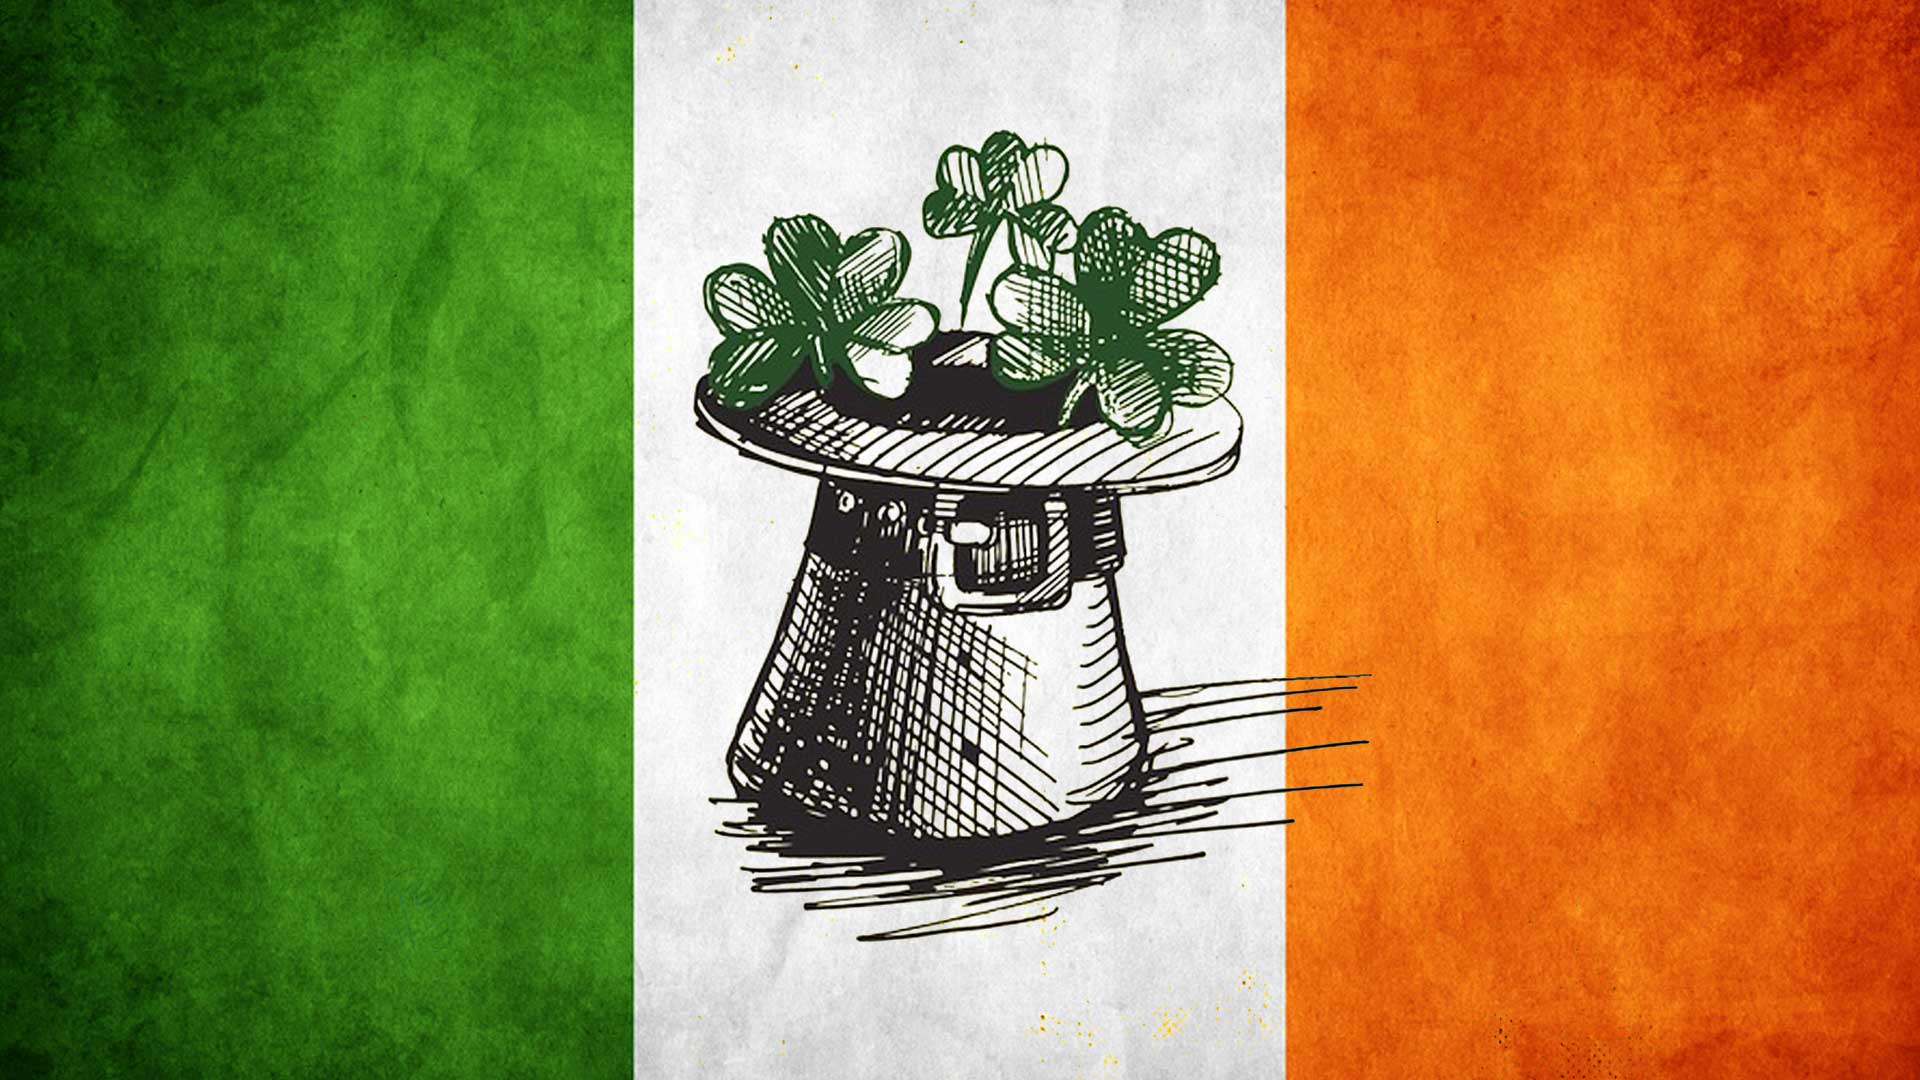 An Introduction To Irish Culture And Why And How It's Shaped My Life For The Better